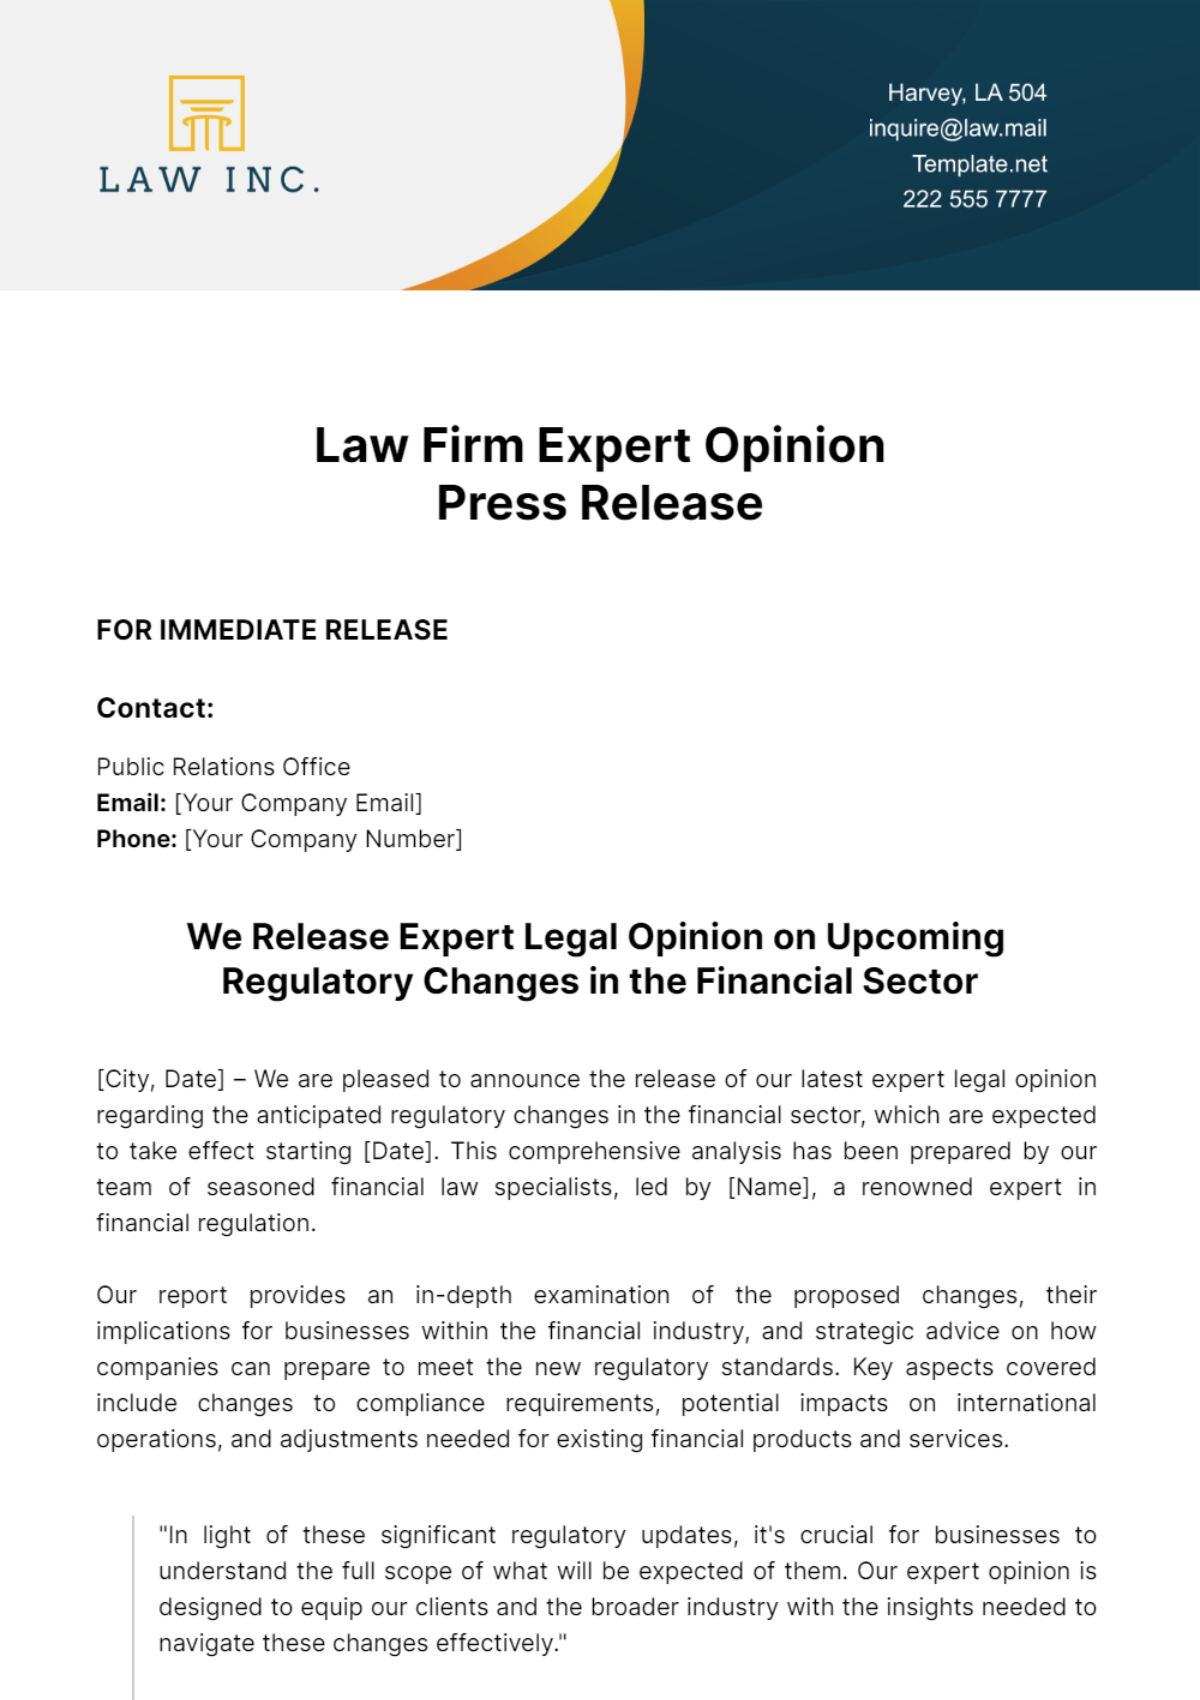 Law Firm Expert Opinion Press Release Template